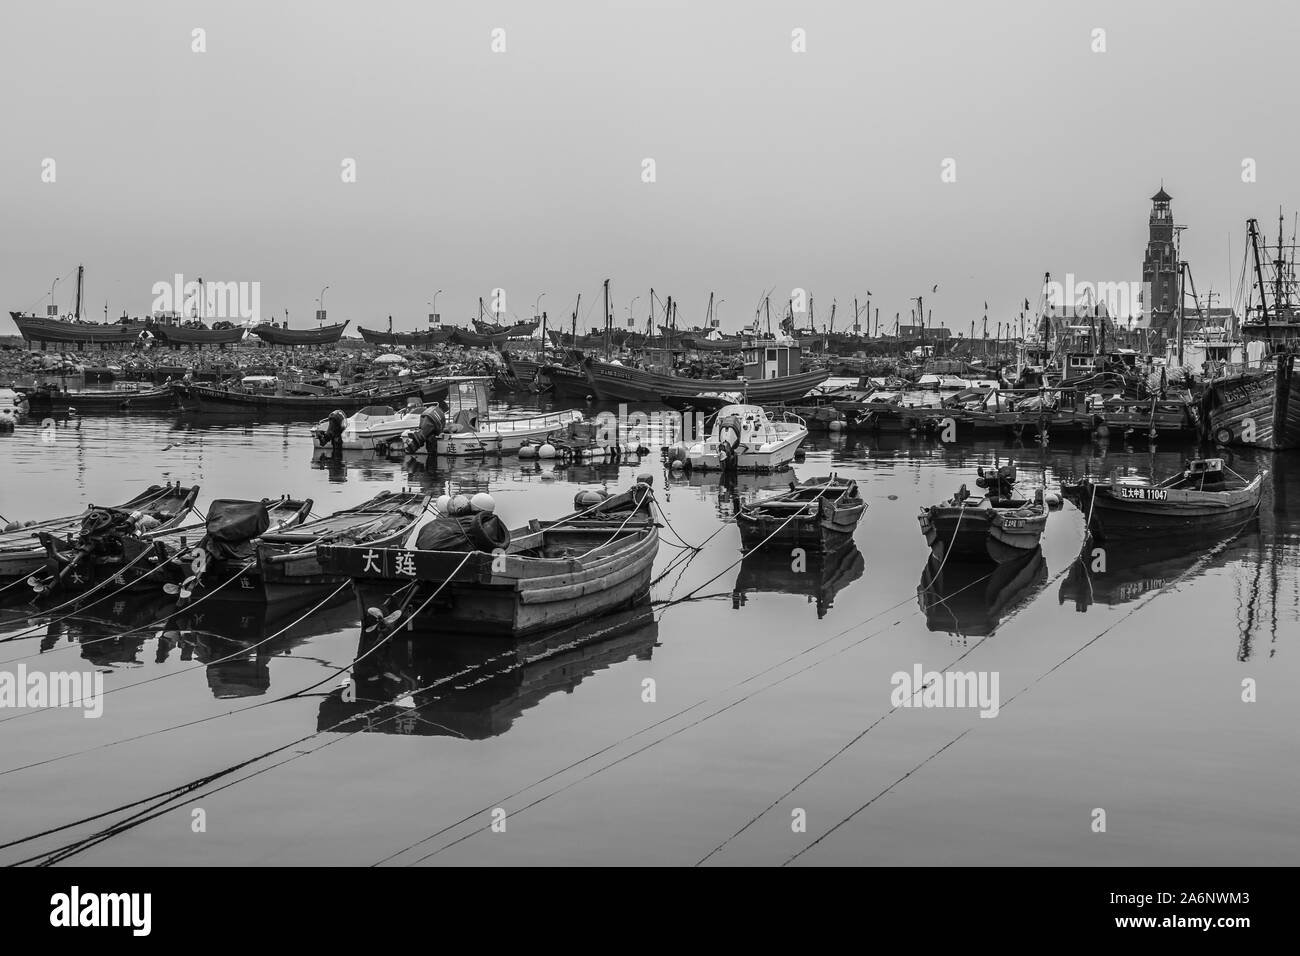 Black and white picture of boats in Dalian old harbor, in China during cloudy weather (Dalian in Chinese) Stock Photo